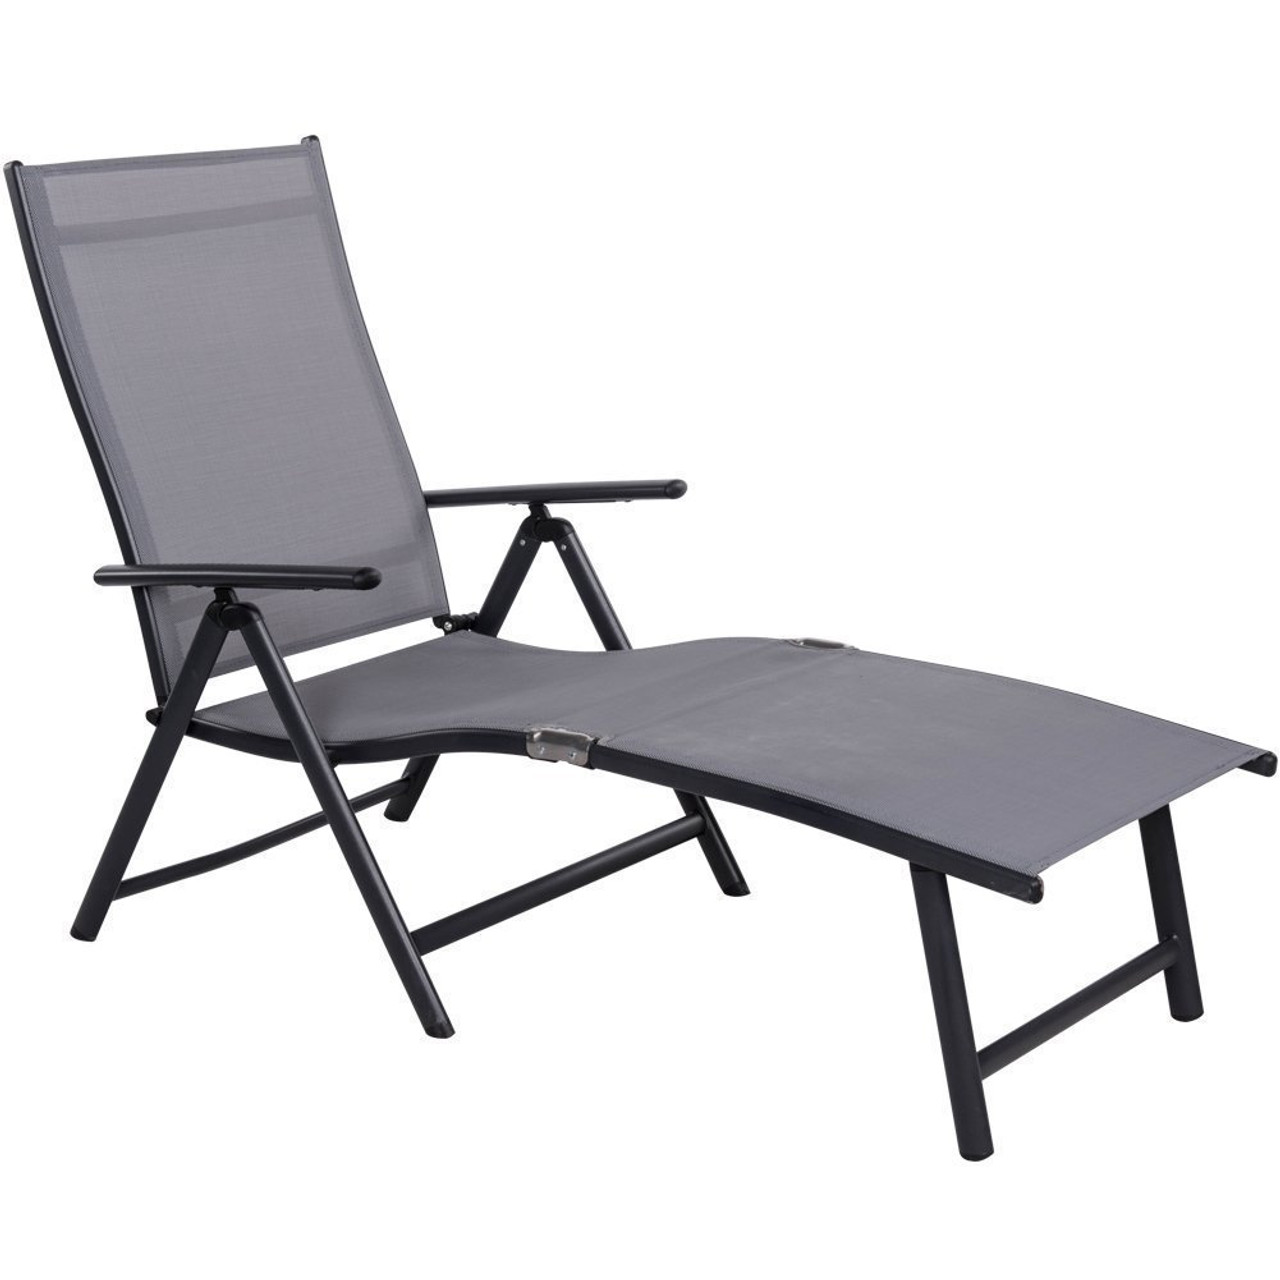 Deluxe Aluminum Beach Yard Pool Folding Chaise Lounge Chair Recliner